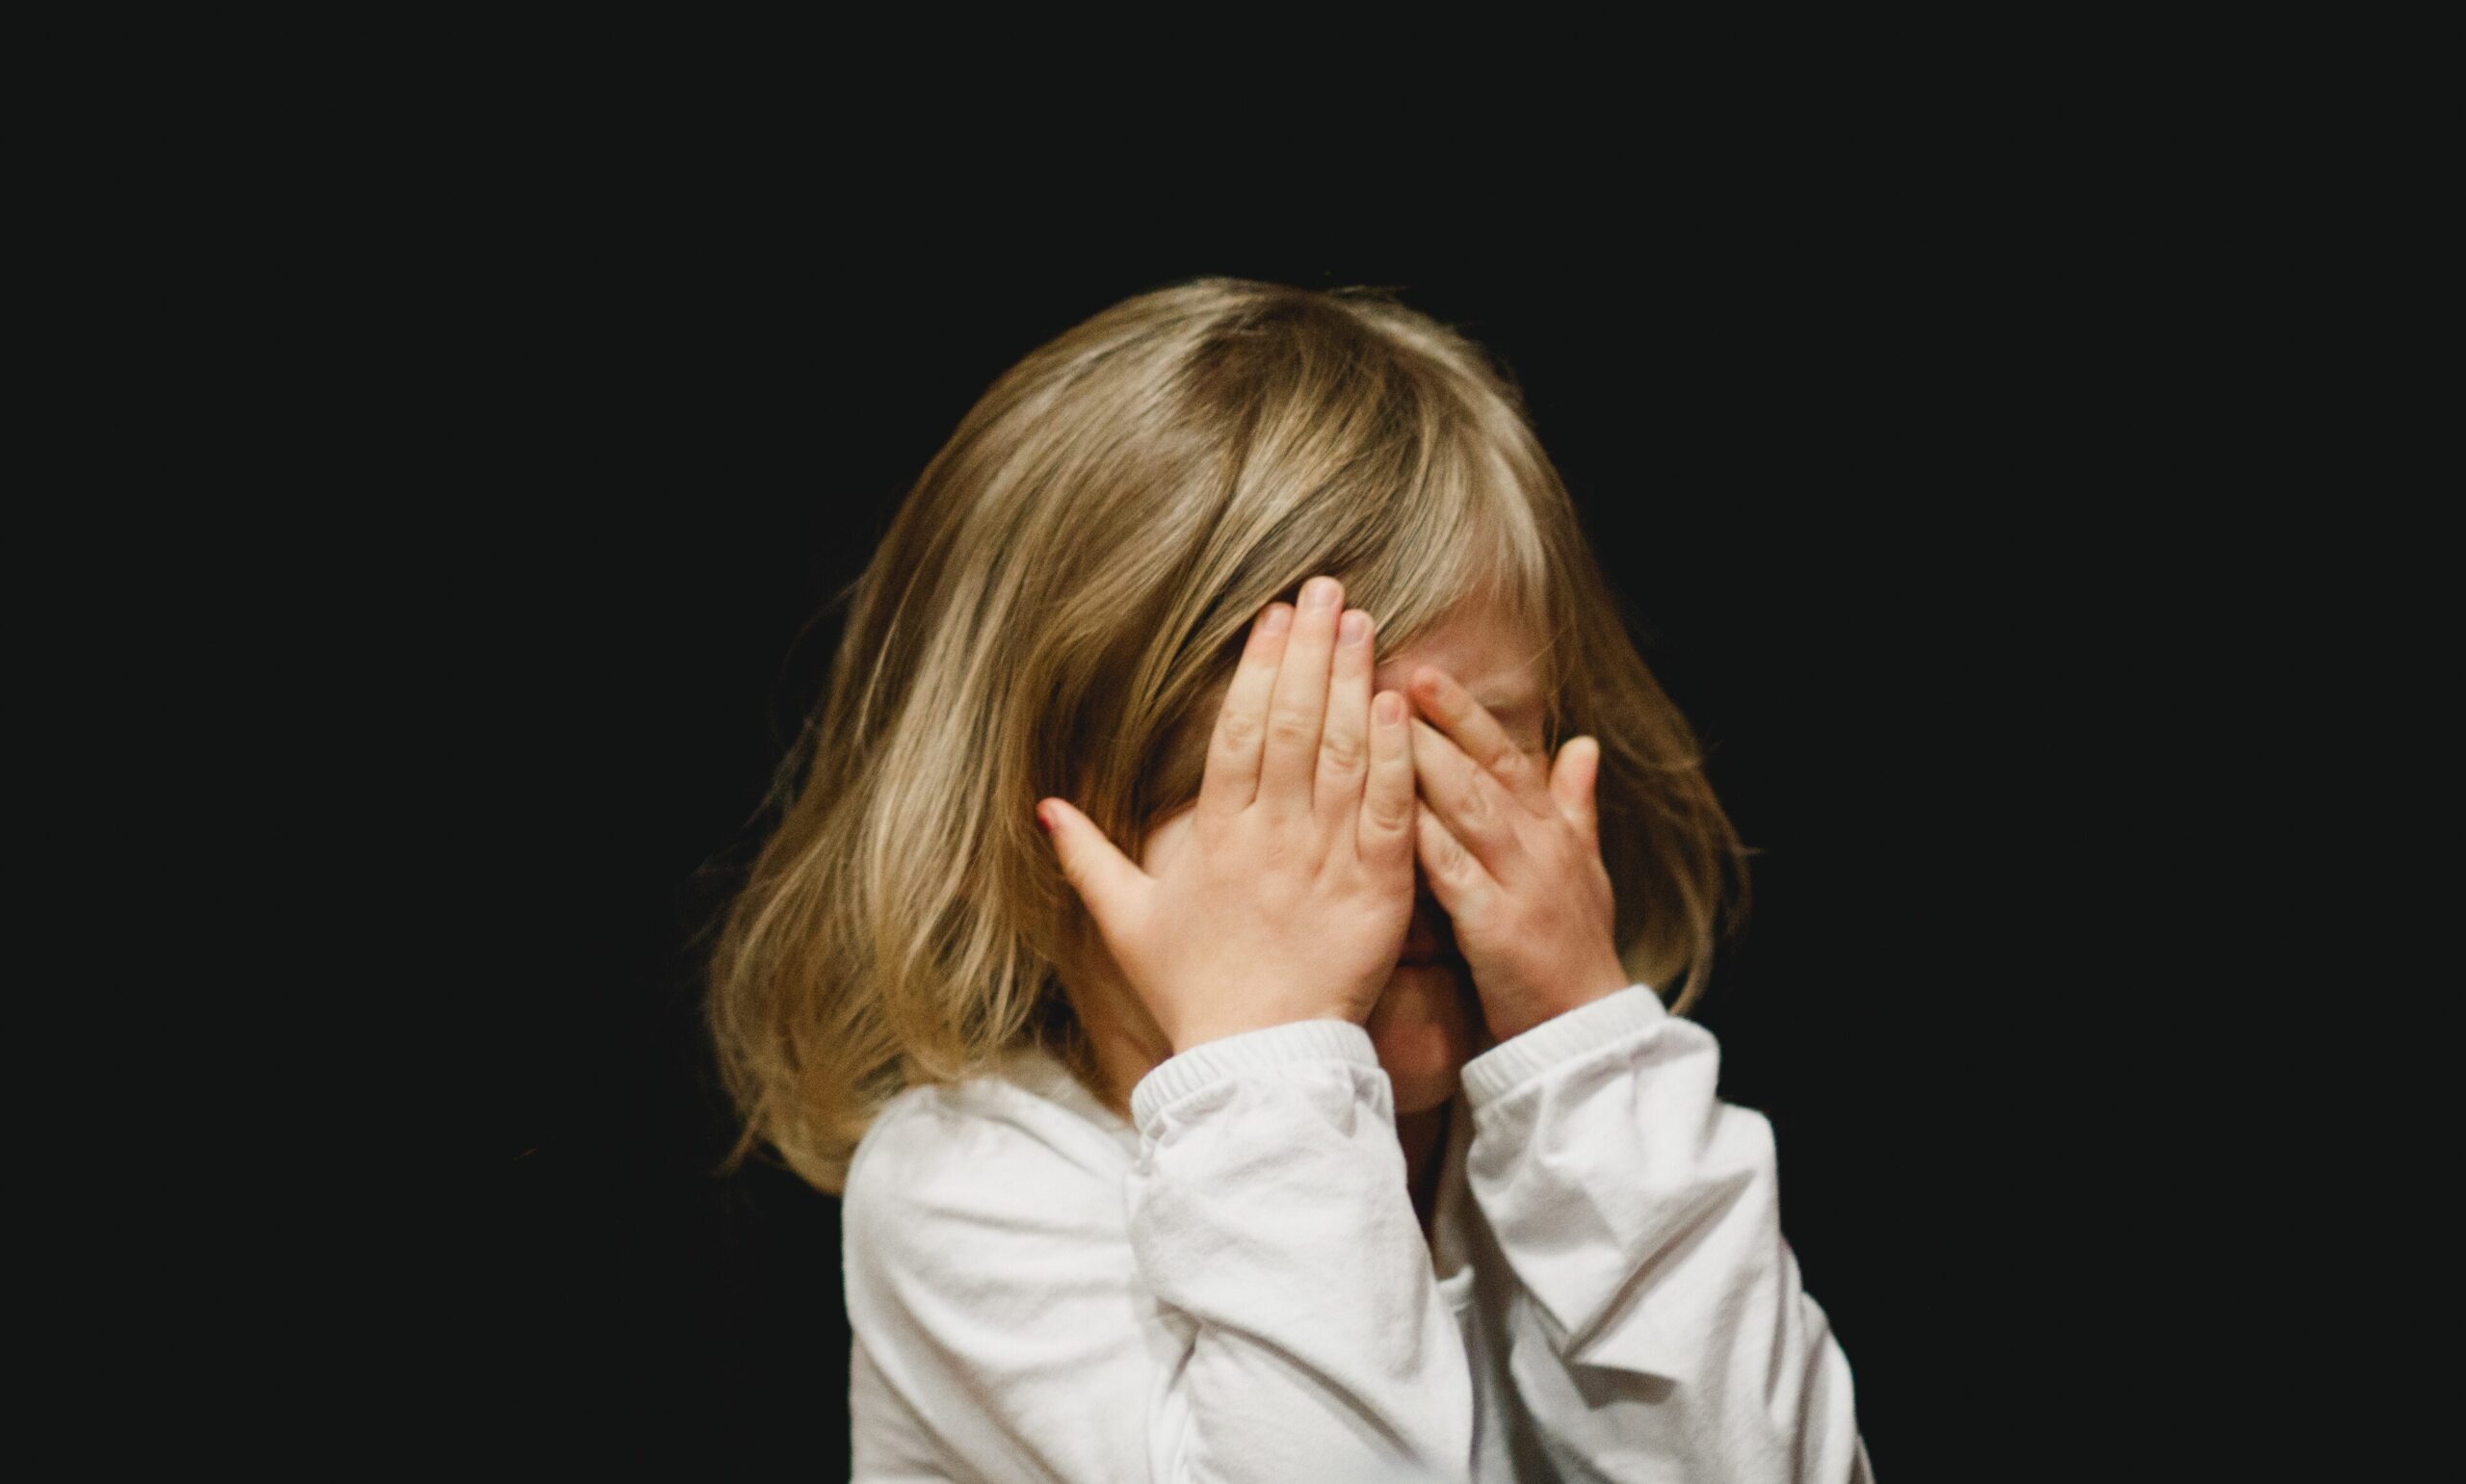 Why lie? Child covers her face after telling a fib